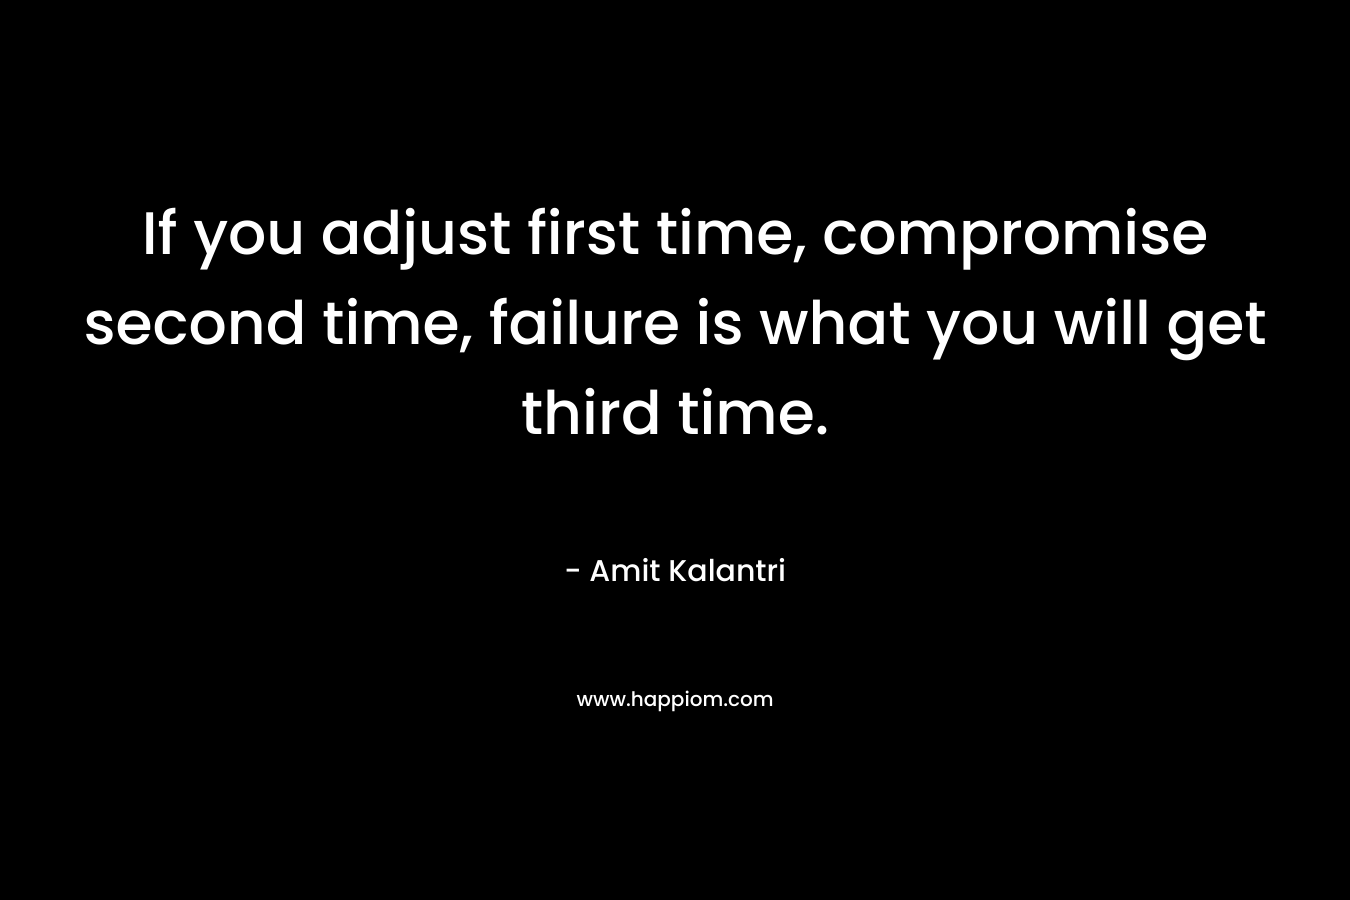 If you adjust first time, compromise second time, failure is what you will get third time. – Amit Kalantri